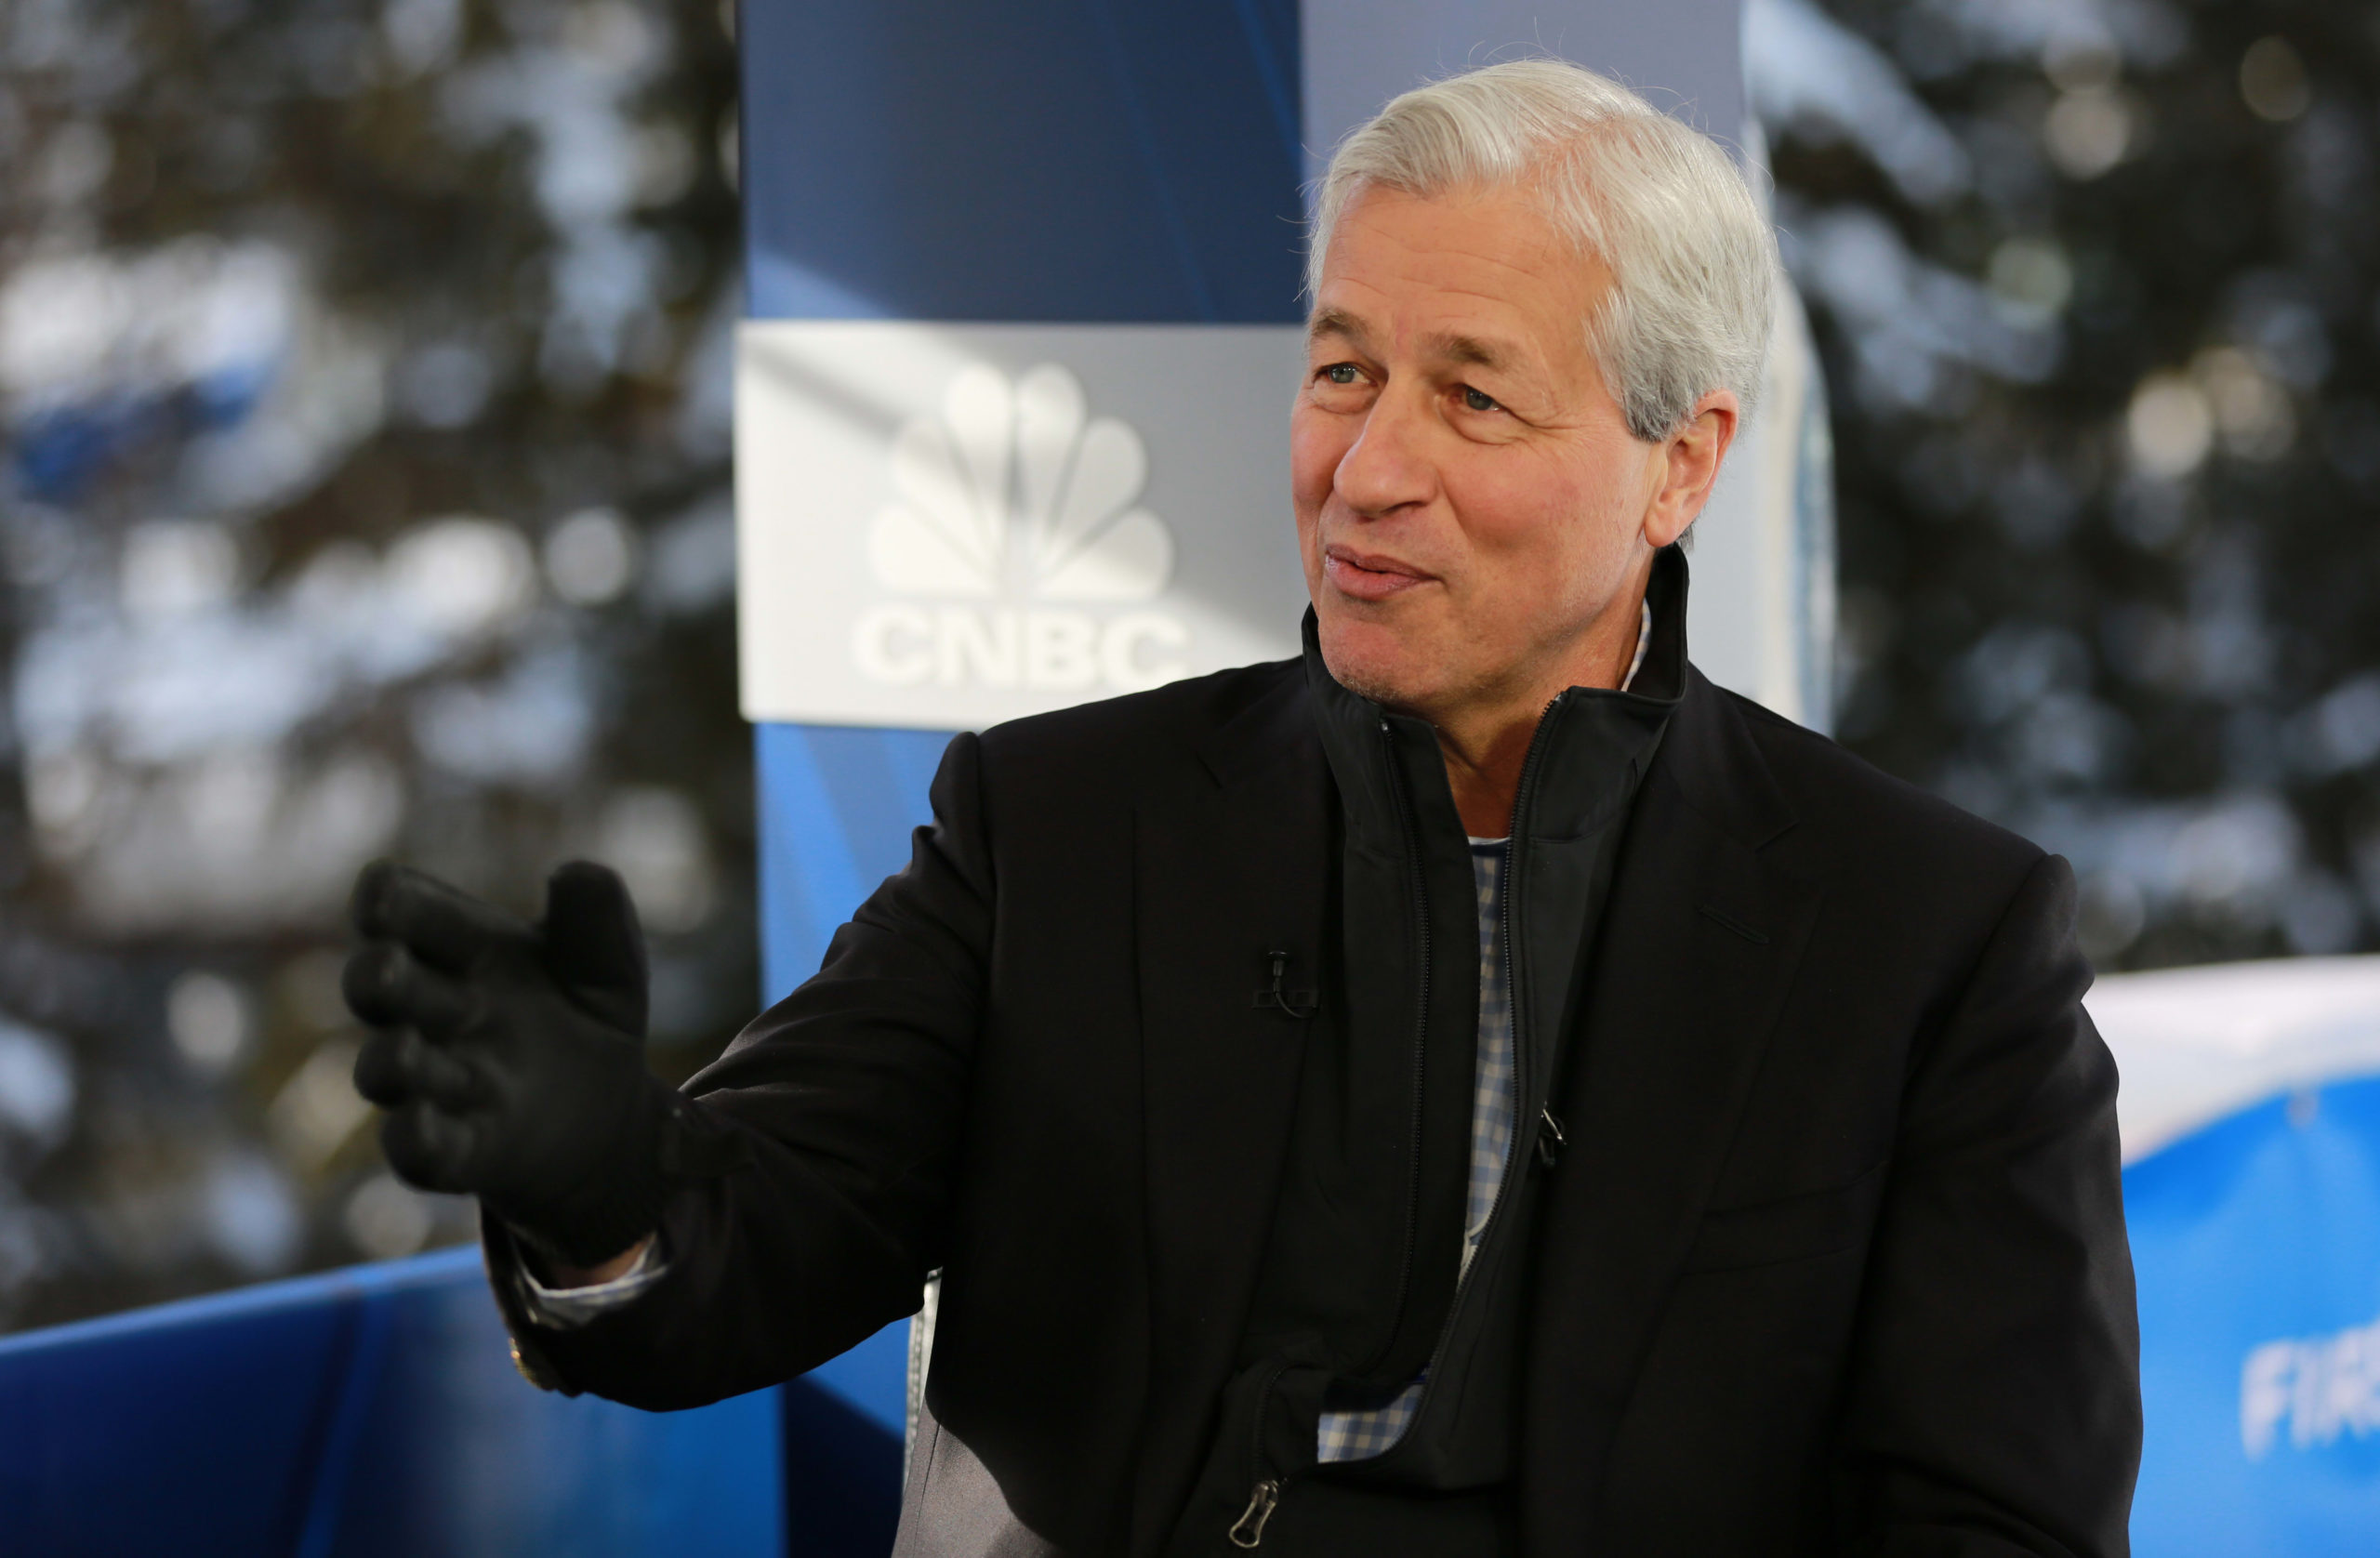 For Jamie Dimon, retirement from JP Morgan is at all times 5 years away